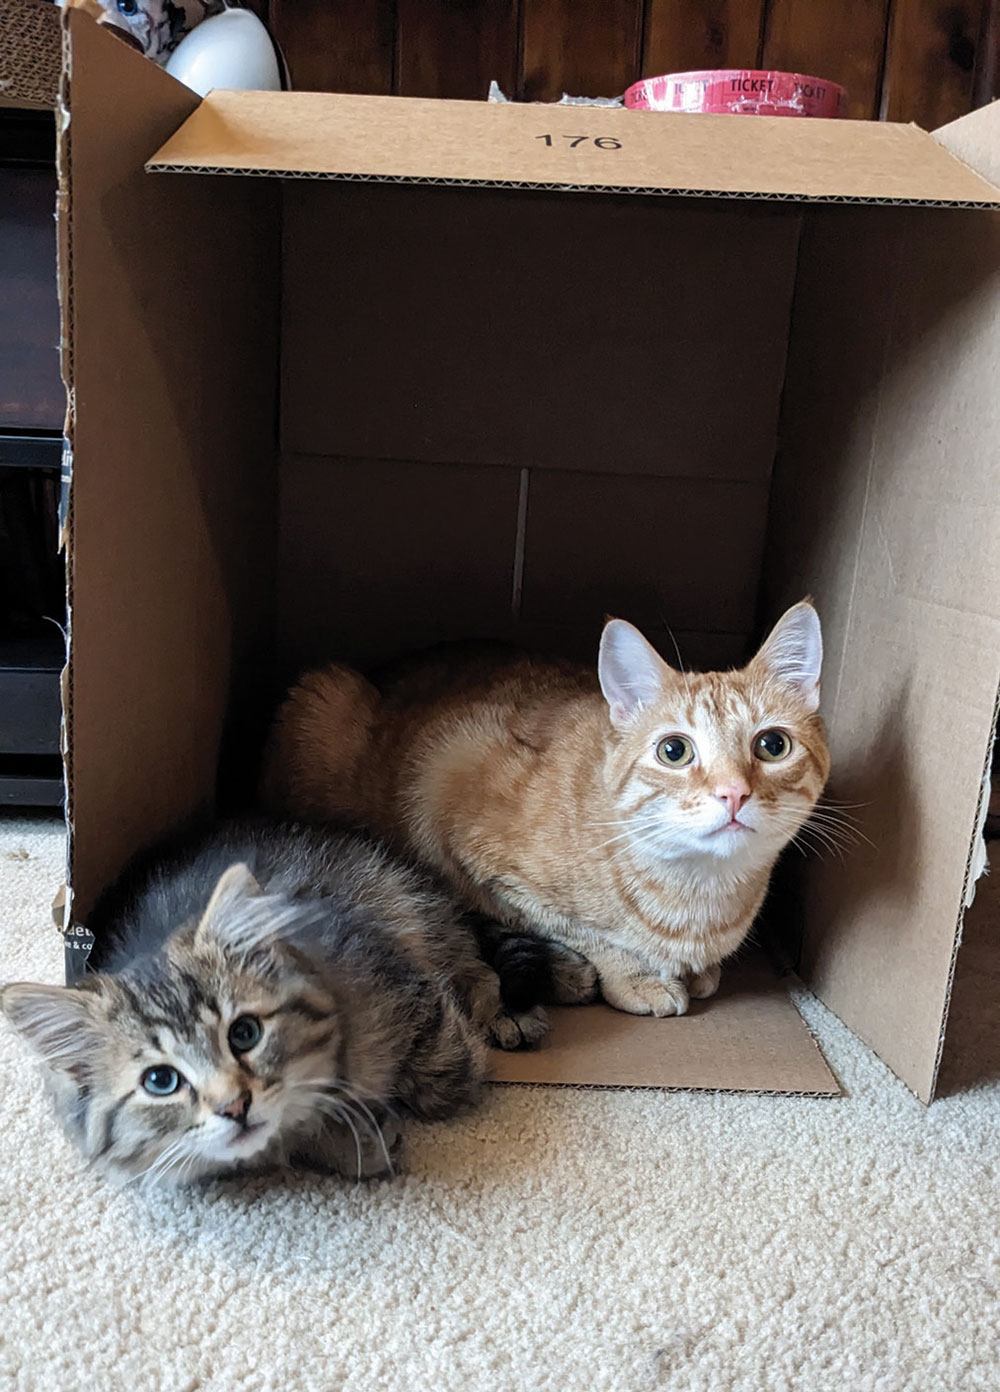 We foster failed Fabio, the tabby kitten,
because of moments like these — learning the joys of a new box from his big brother, Courage. Fabio went from a grumpy kitten left in our shed by a feral mom to a lovebug who fits perfectly into our herd of other cats. Courage wakes me up every morning by laying across my chest and purring so hard his whole body rumbles. Submitted by Tara.